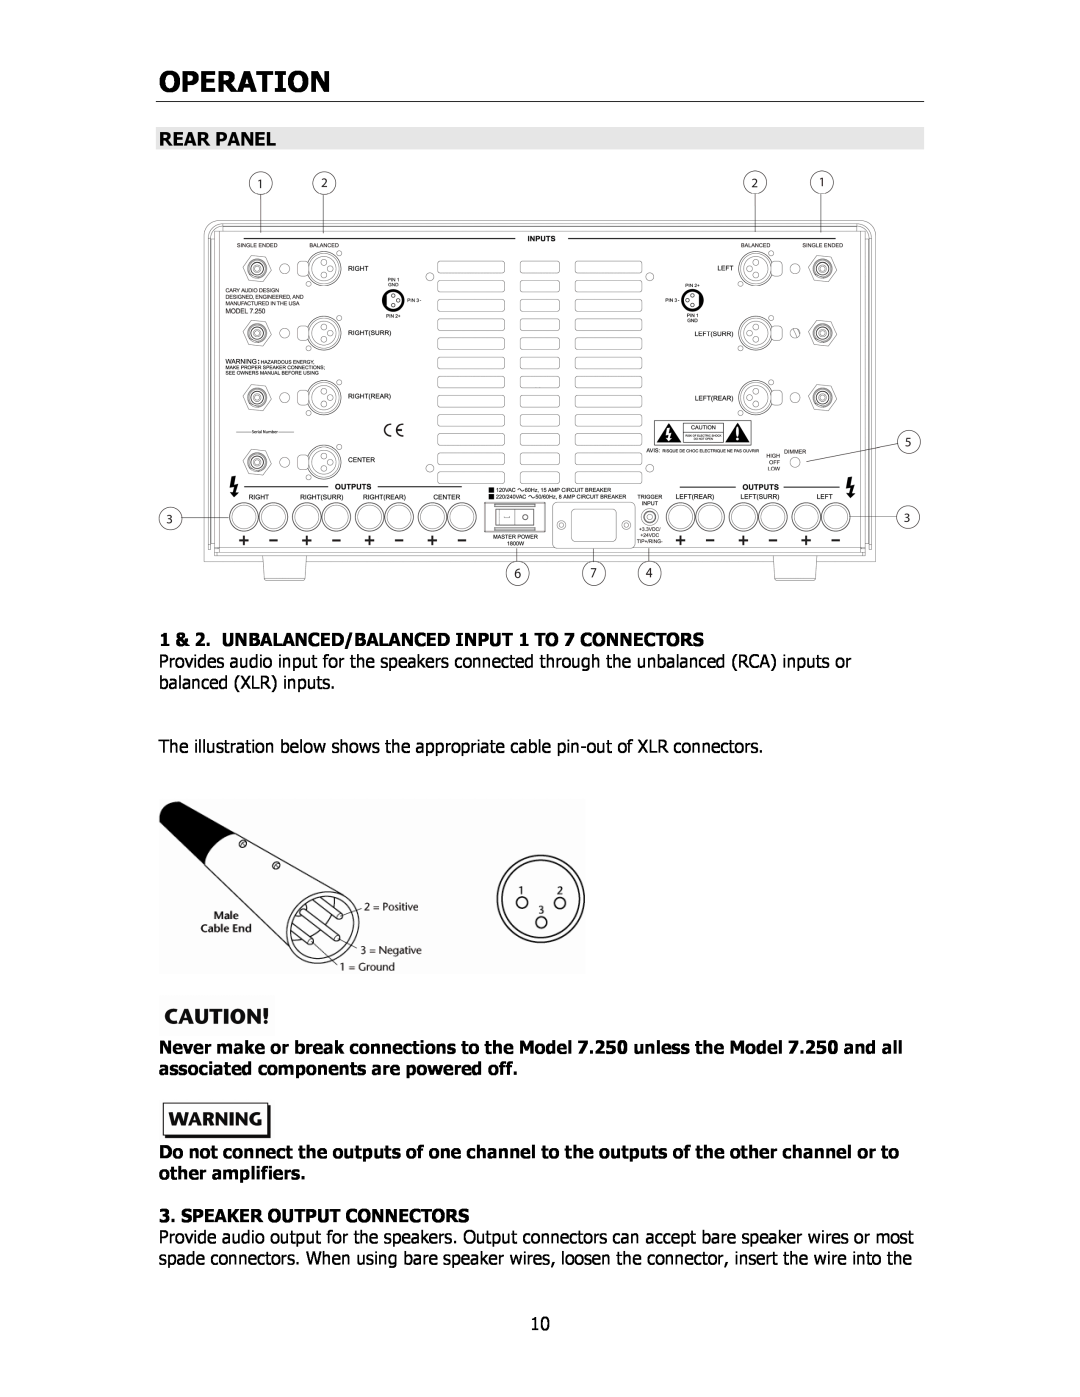 Cary Audio Design 7.25 owner manual Operation, Rear Panel 